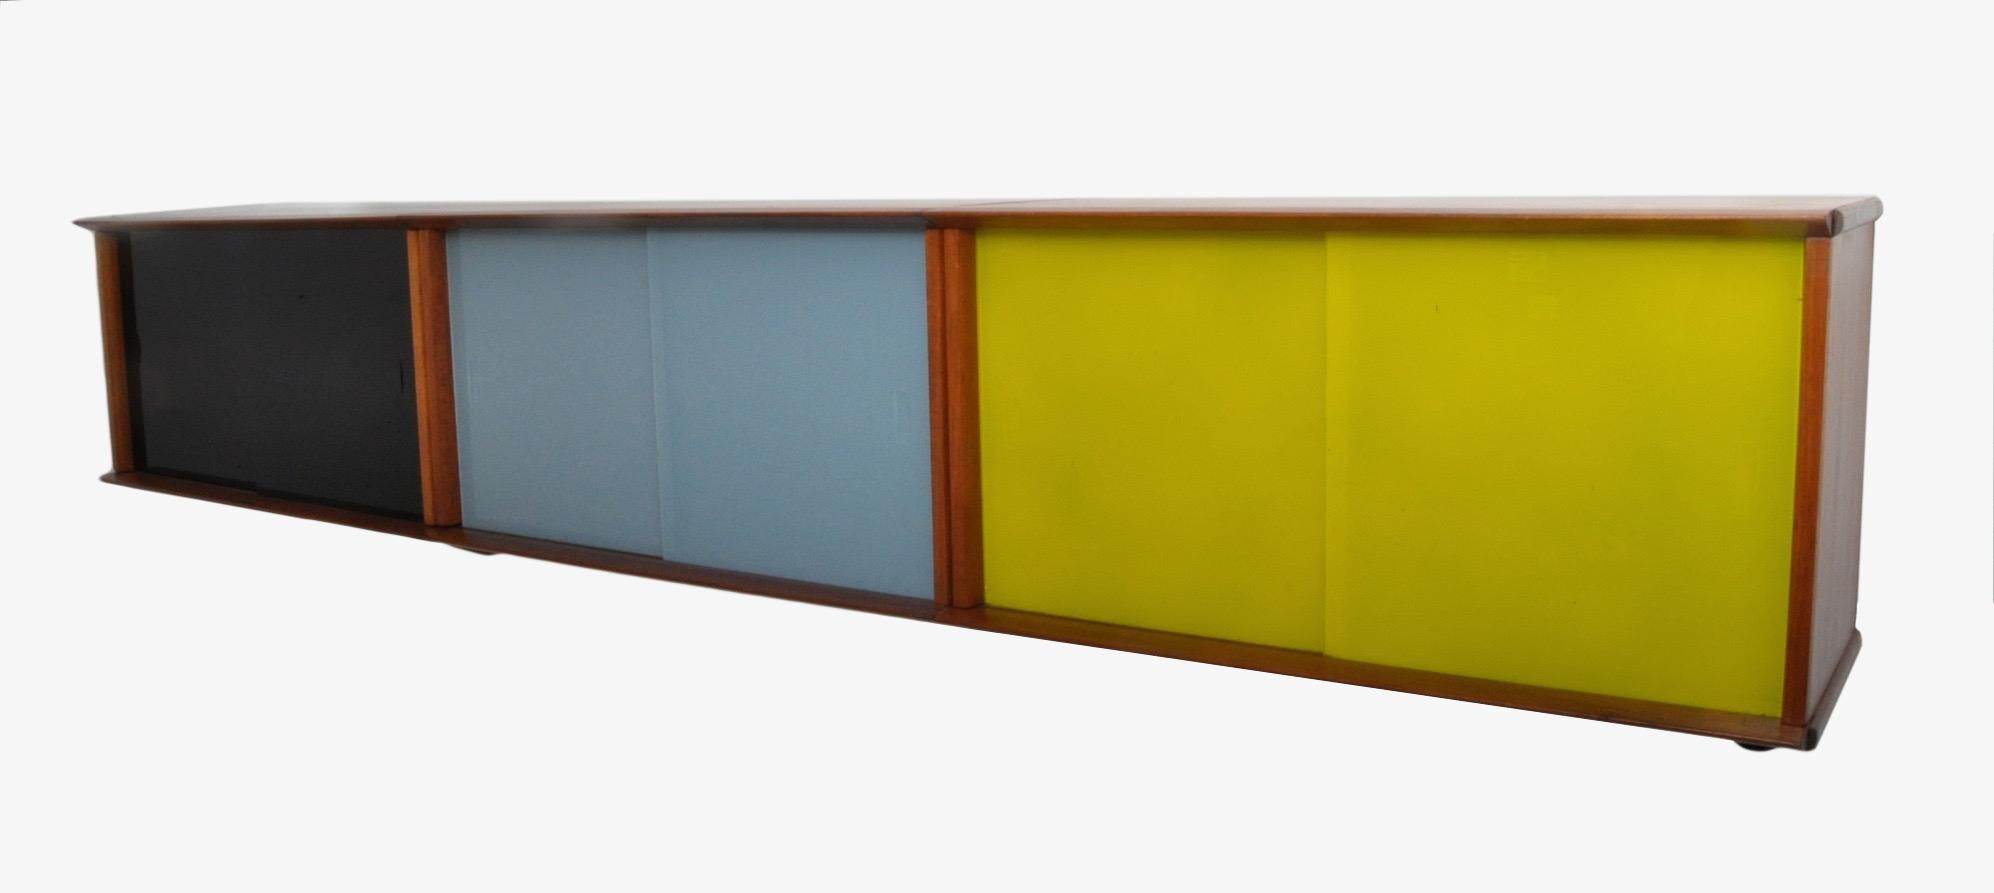 Modular wall cabinet designed by Didier Rozaffy for Oscar Paris. The entire cabinet can be broken down then reassembled on location. The cabinet retains the original colorful glass sliding doors.